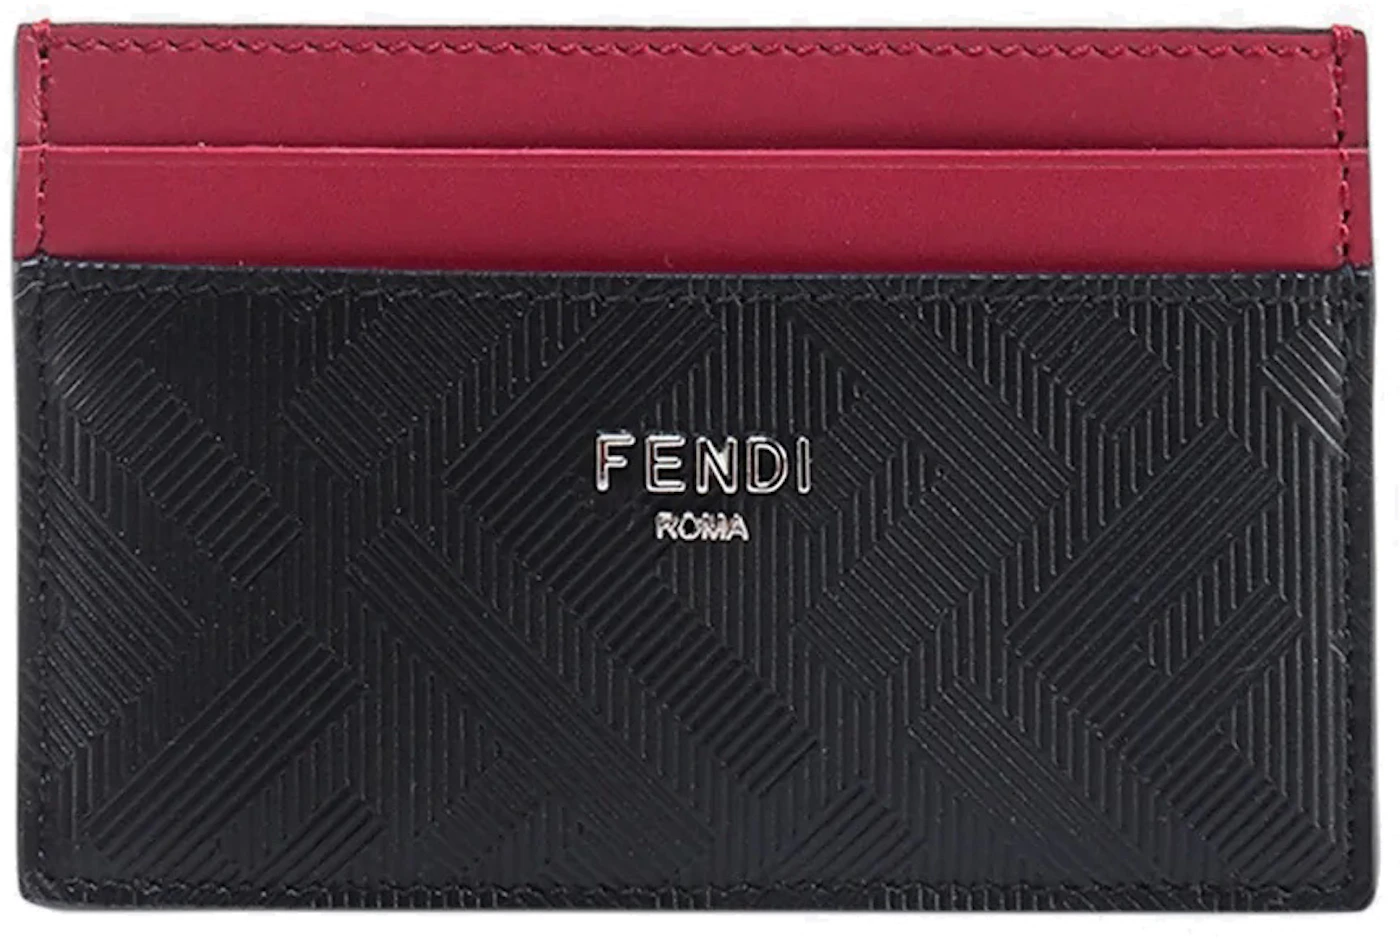 Fendi Leather Card Holder With FF Motif Black/Red in Leather - US